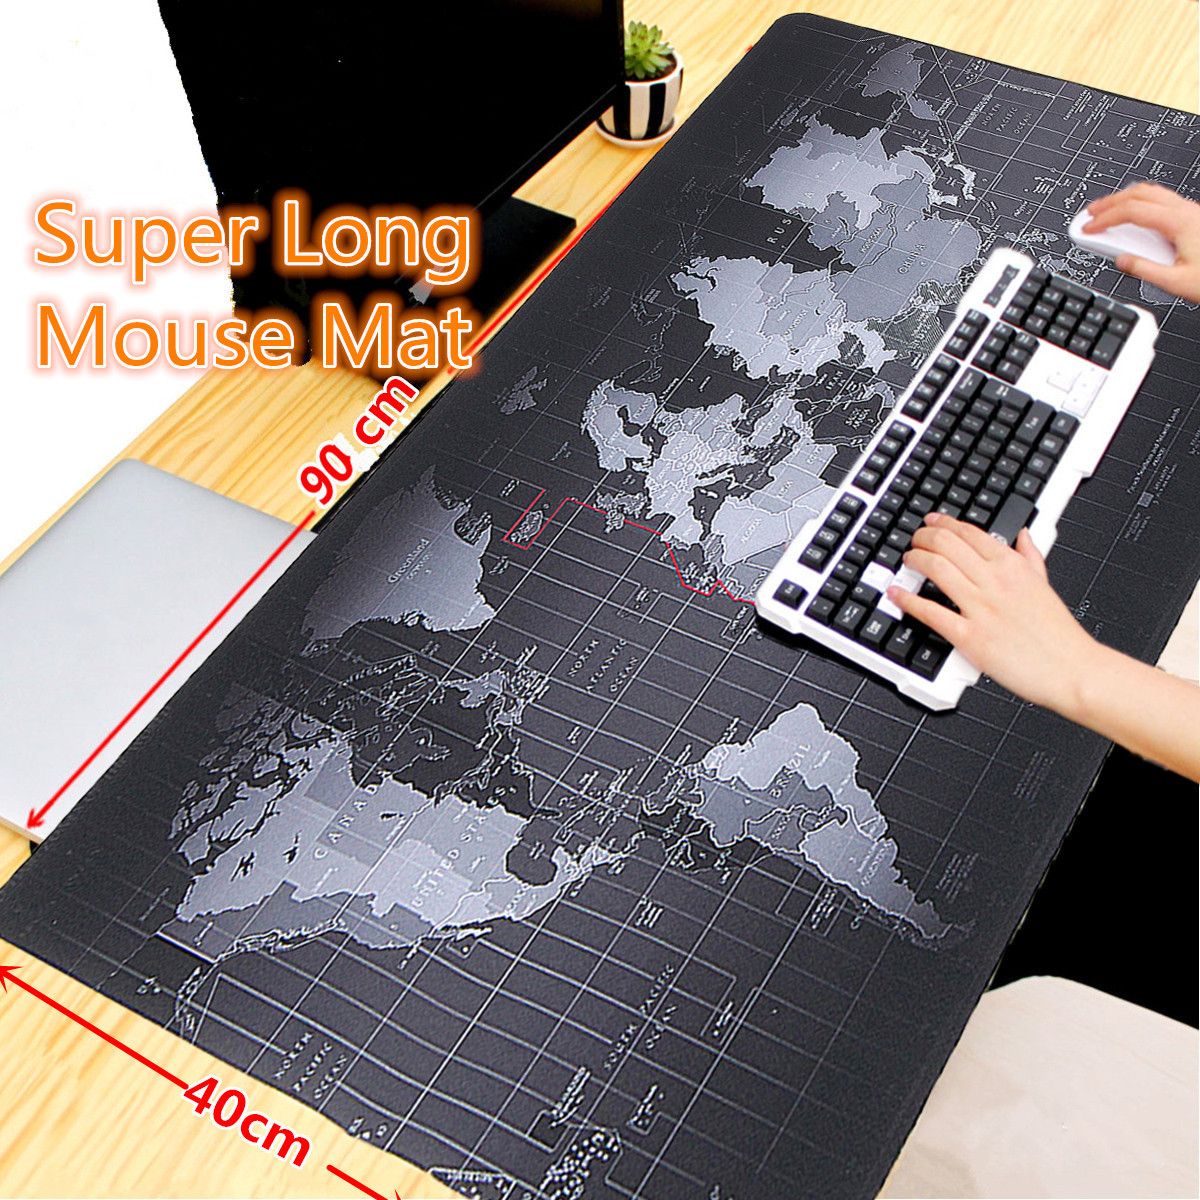 900x400x2mm-Large-Size-World-Map-Mouse-Pad-For-Laptop-Computer-1118975